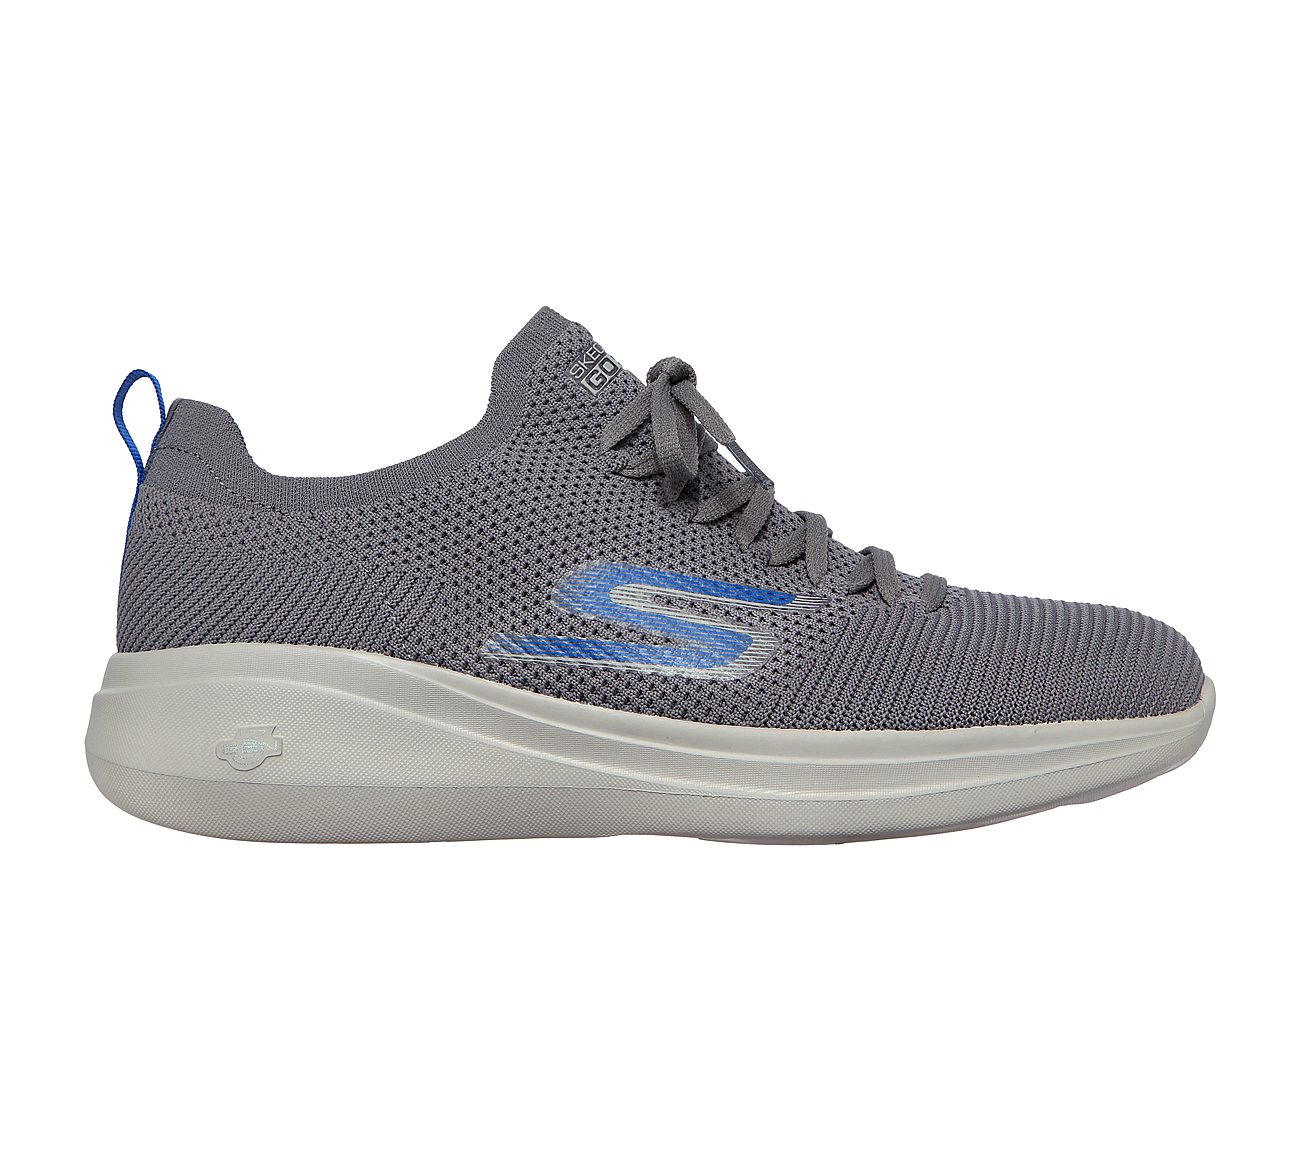 GO RUN FAST - MONOGRAM, CCHARCOAL Footwear Lateral View